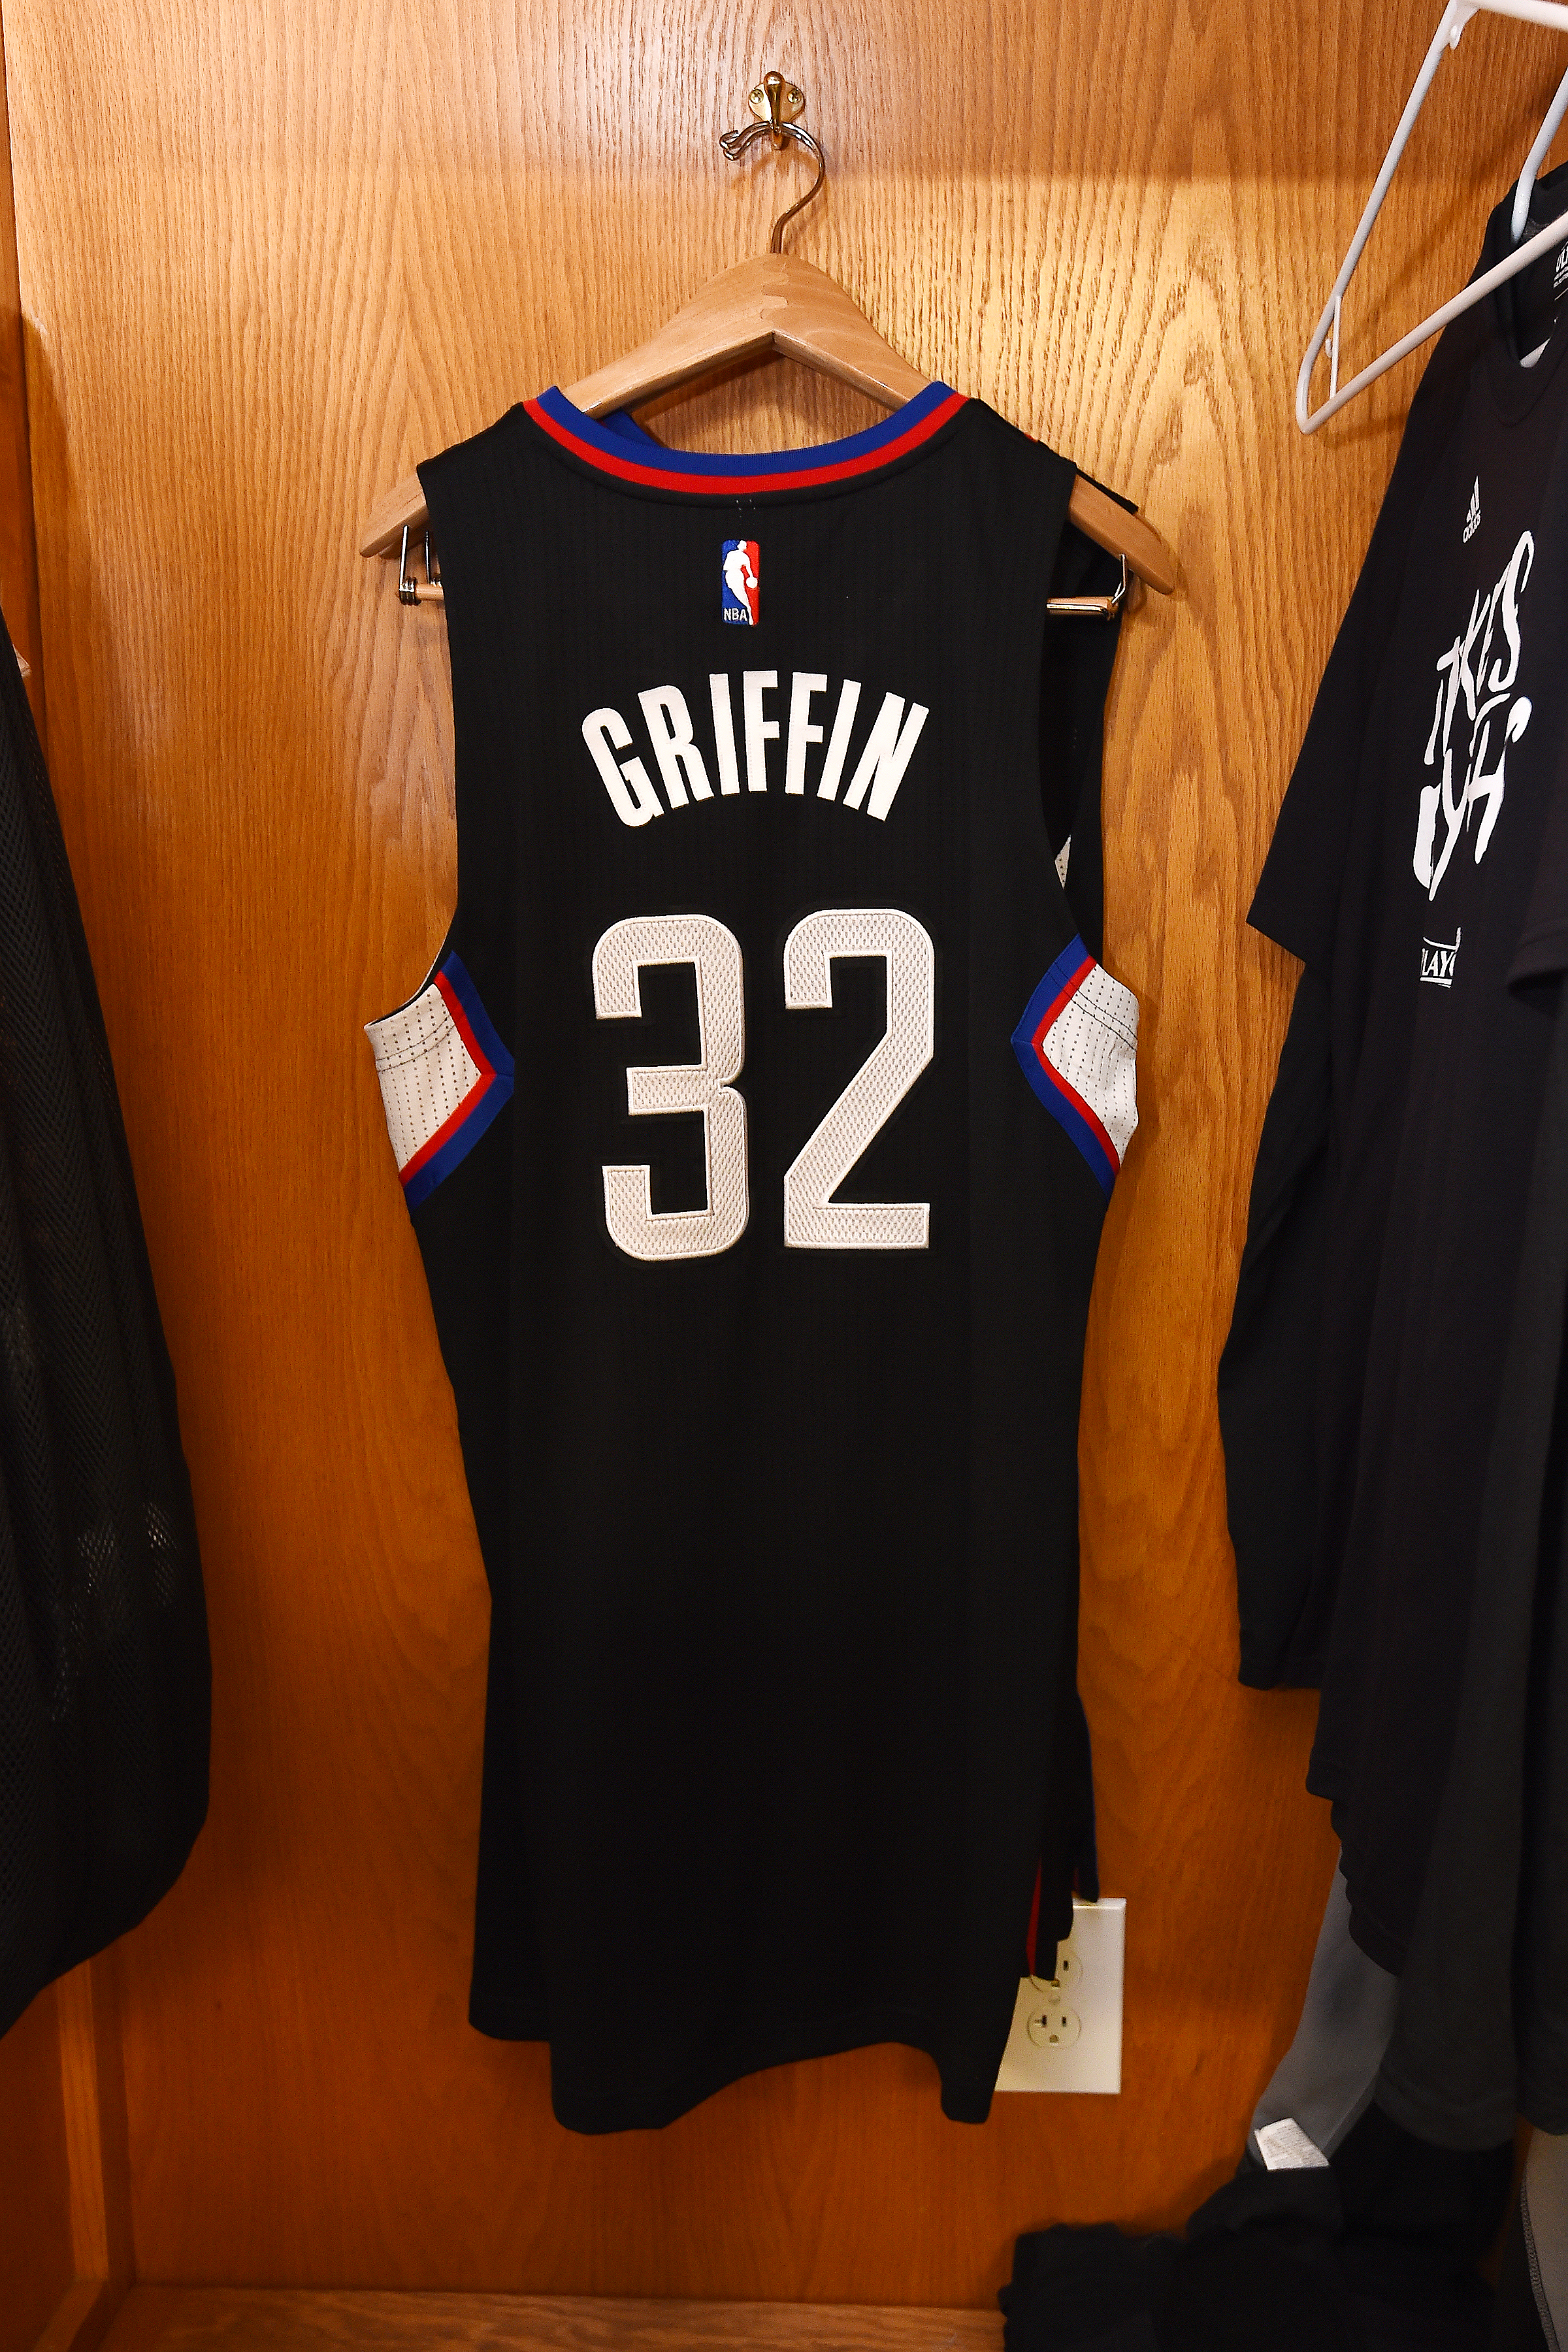 Clippers, Nike Unveil “Statement” Jersey - Clips Nation